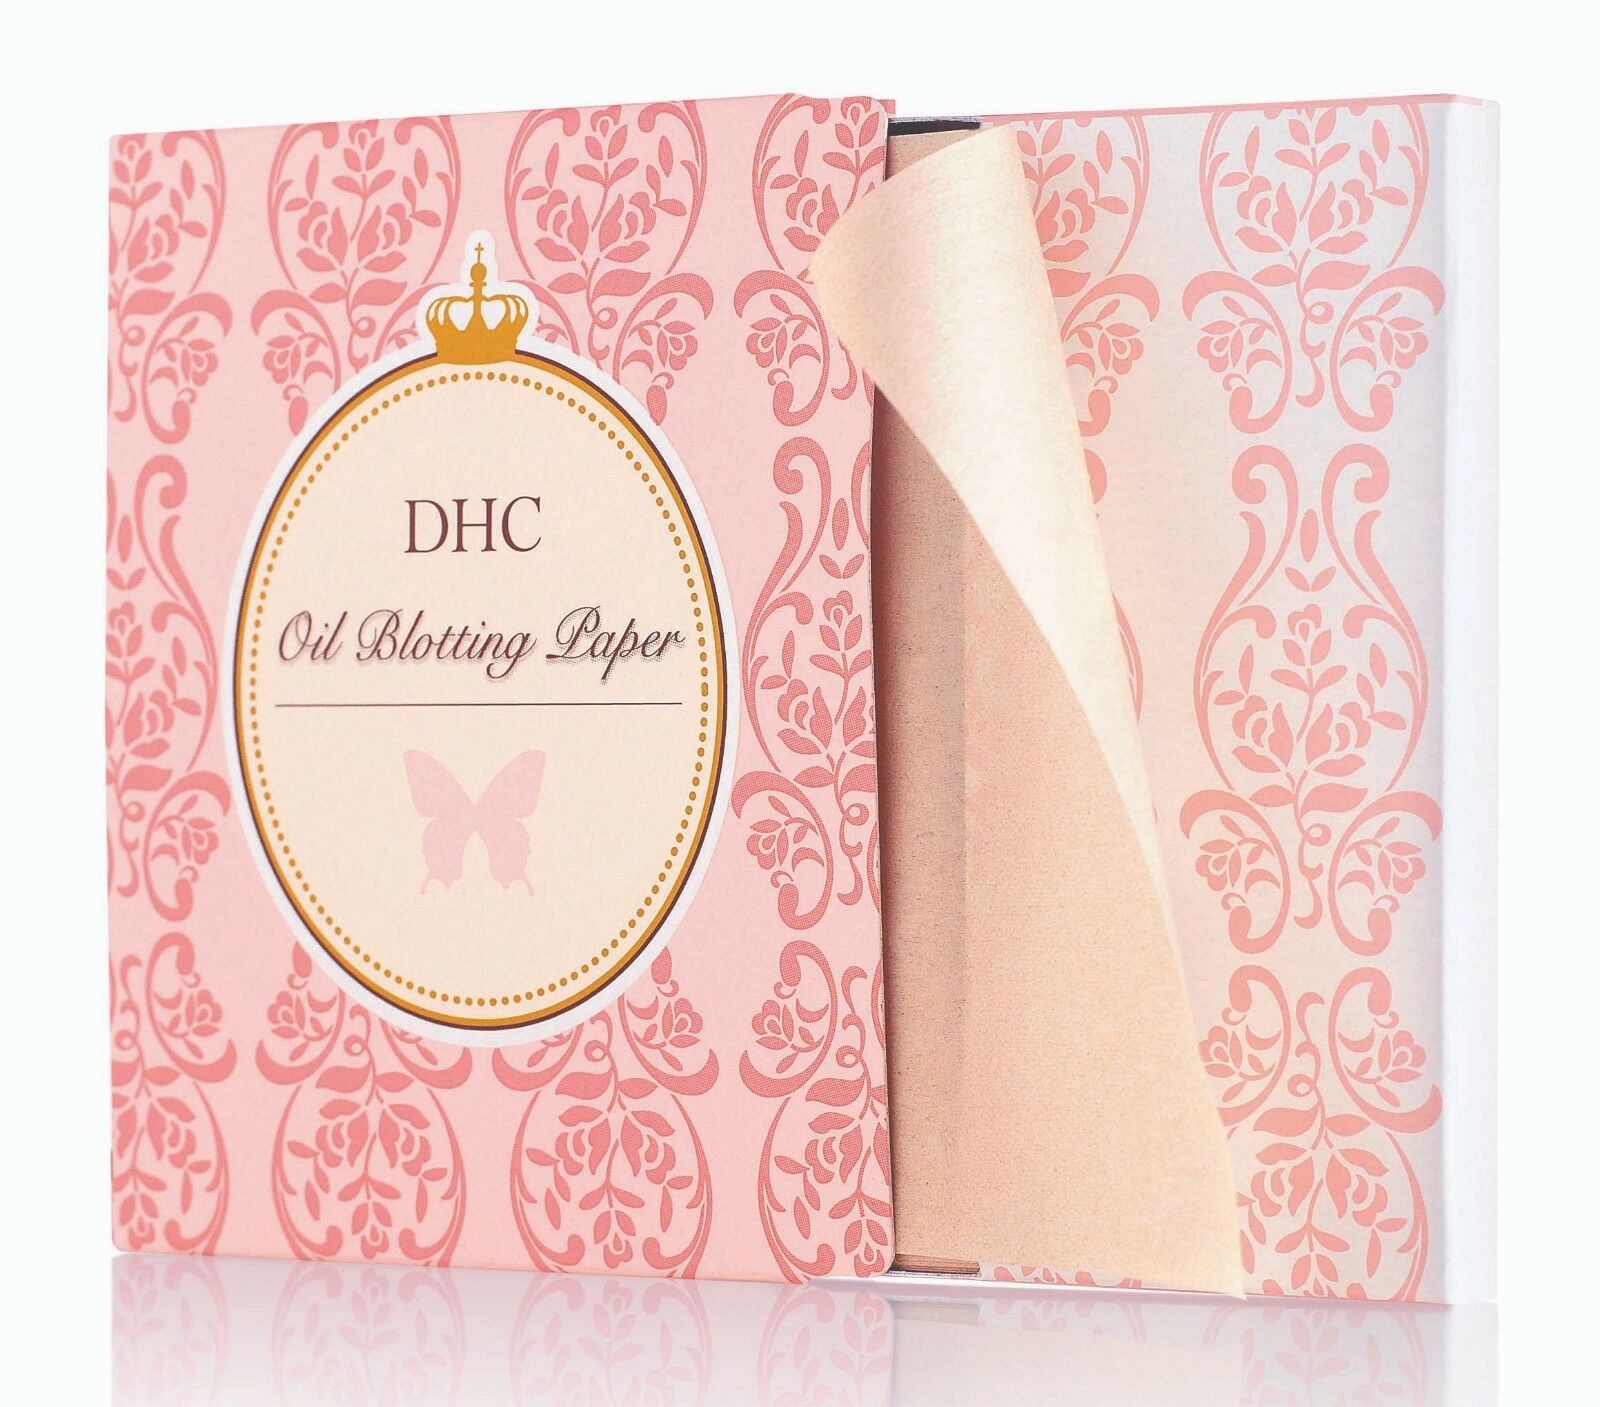 Dhc Blotting Paper 2 Or 3 Pack, 100 Sheets In Each Pack, Includes 4 Free Samples